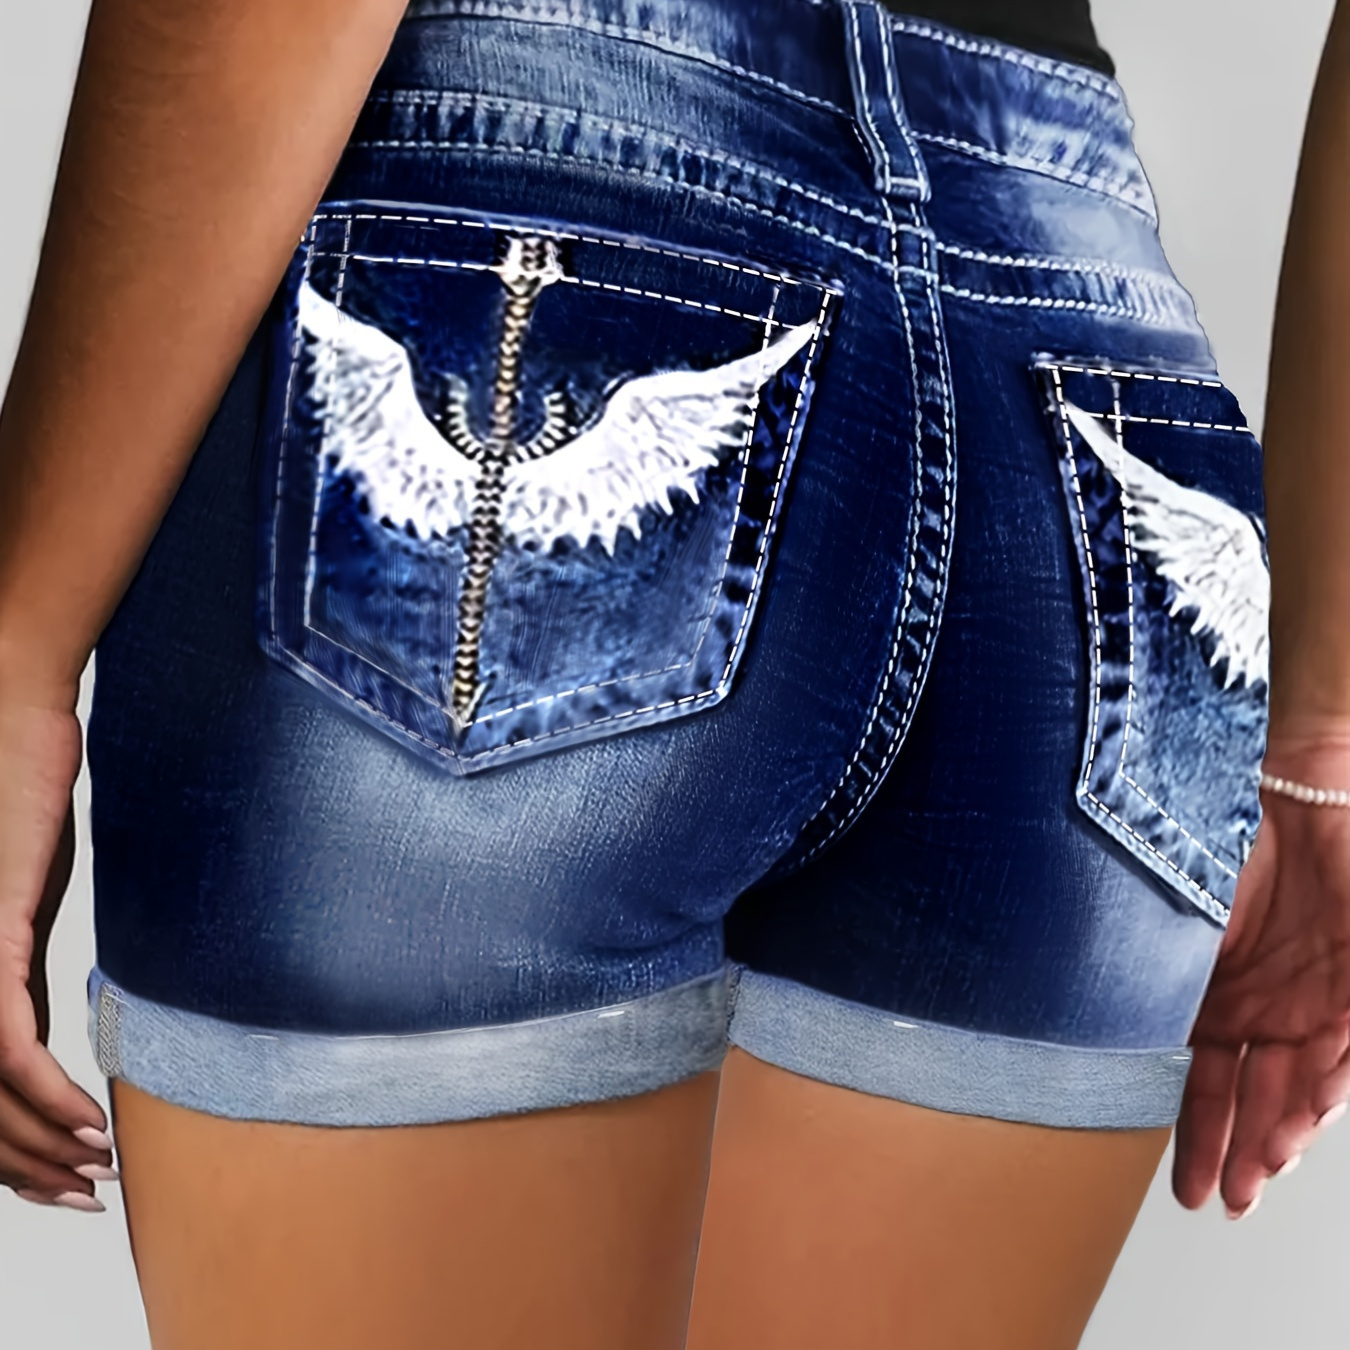 

Women's Plus Size Blue Denim Shorts With Embroidered Wings Pattern, Cuffed Hem, Vintage Casual Style For Outings